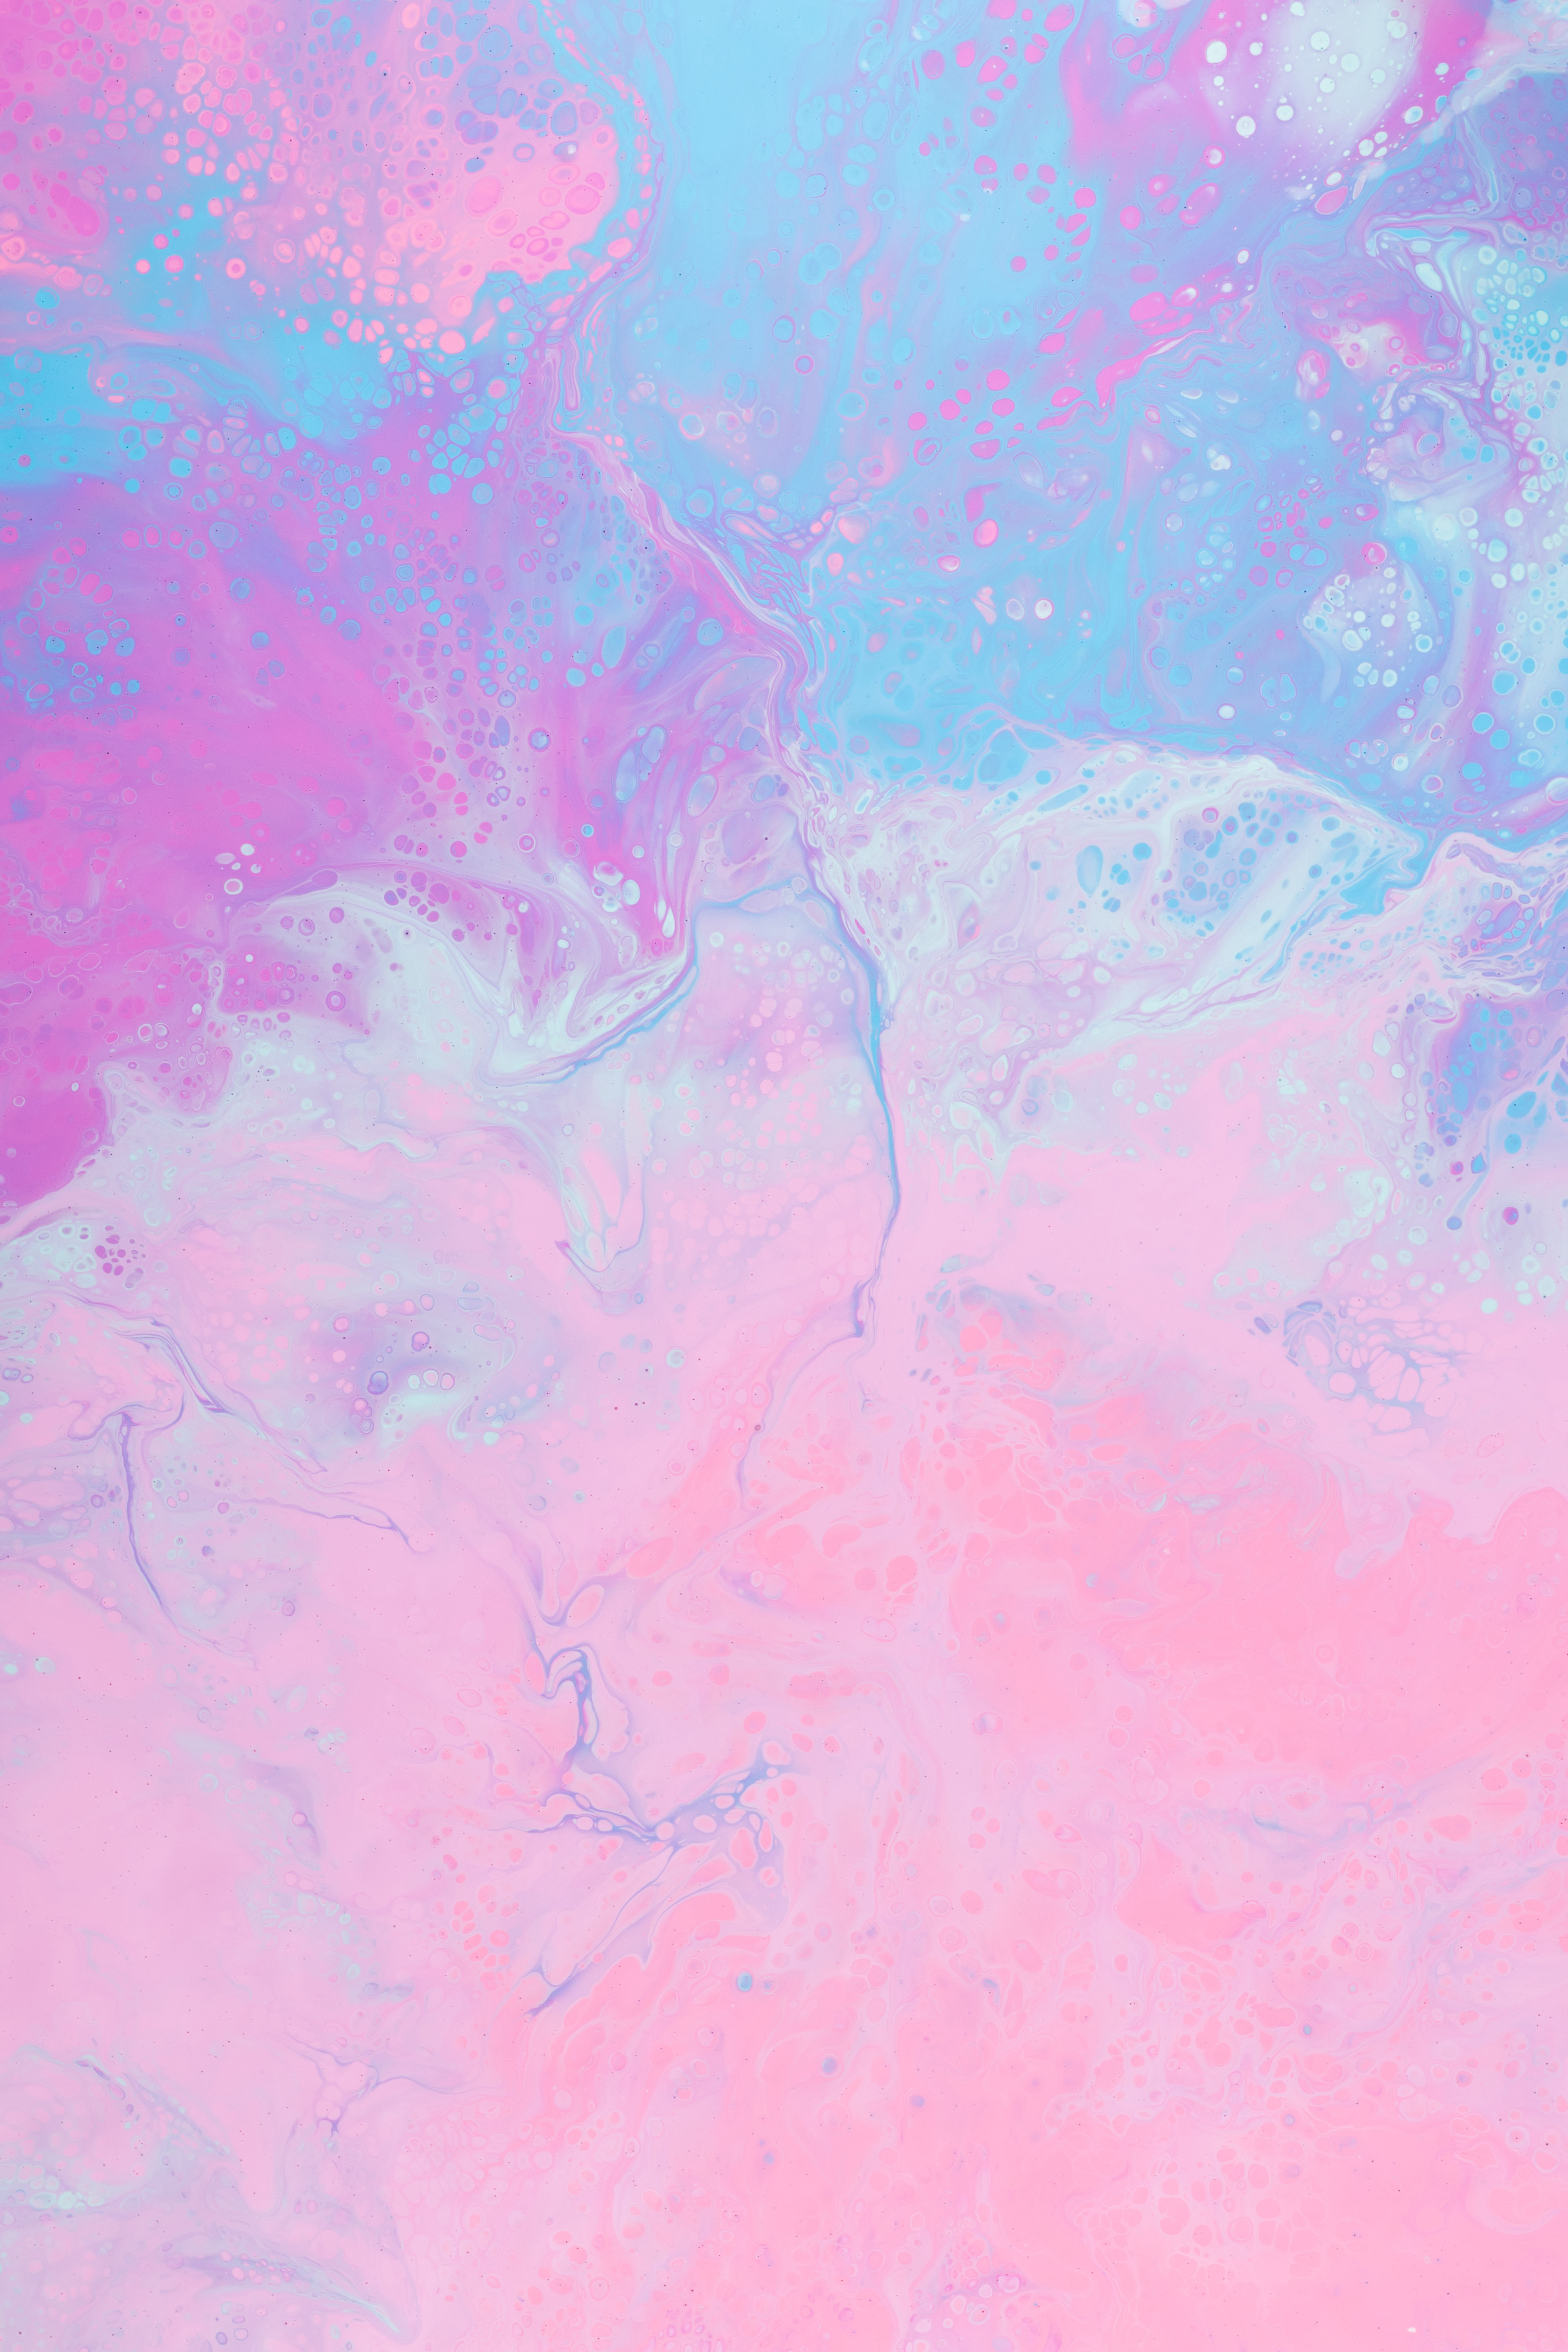 mixing, stains, abstract, divorces, paint, spots Aesthetic wallpaper